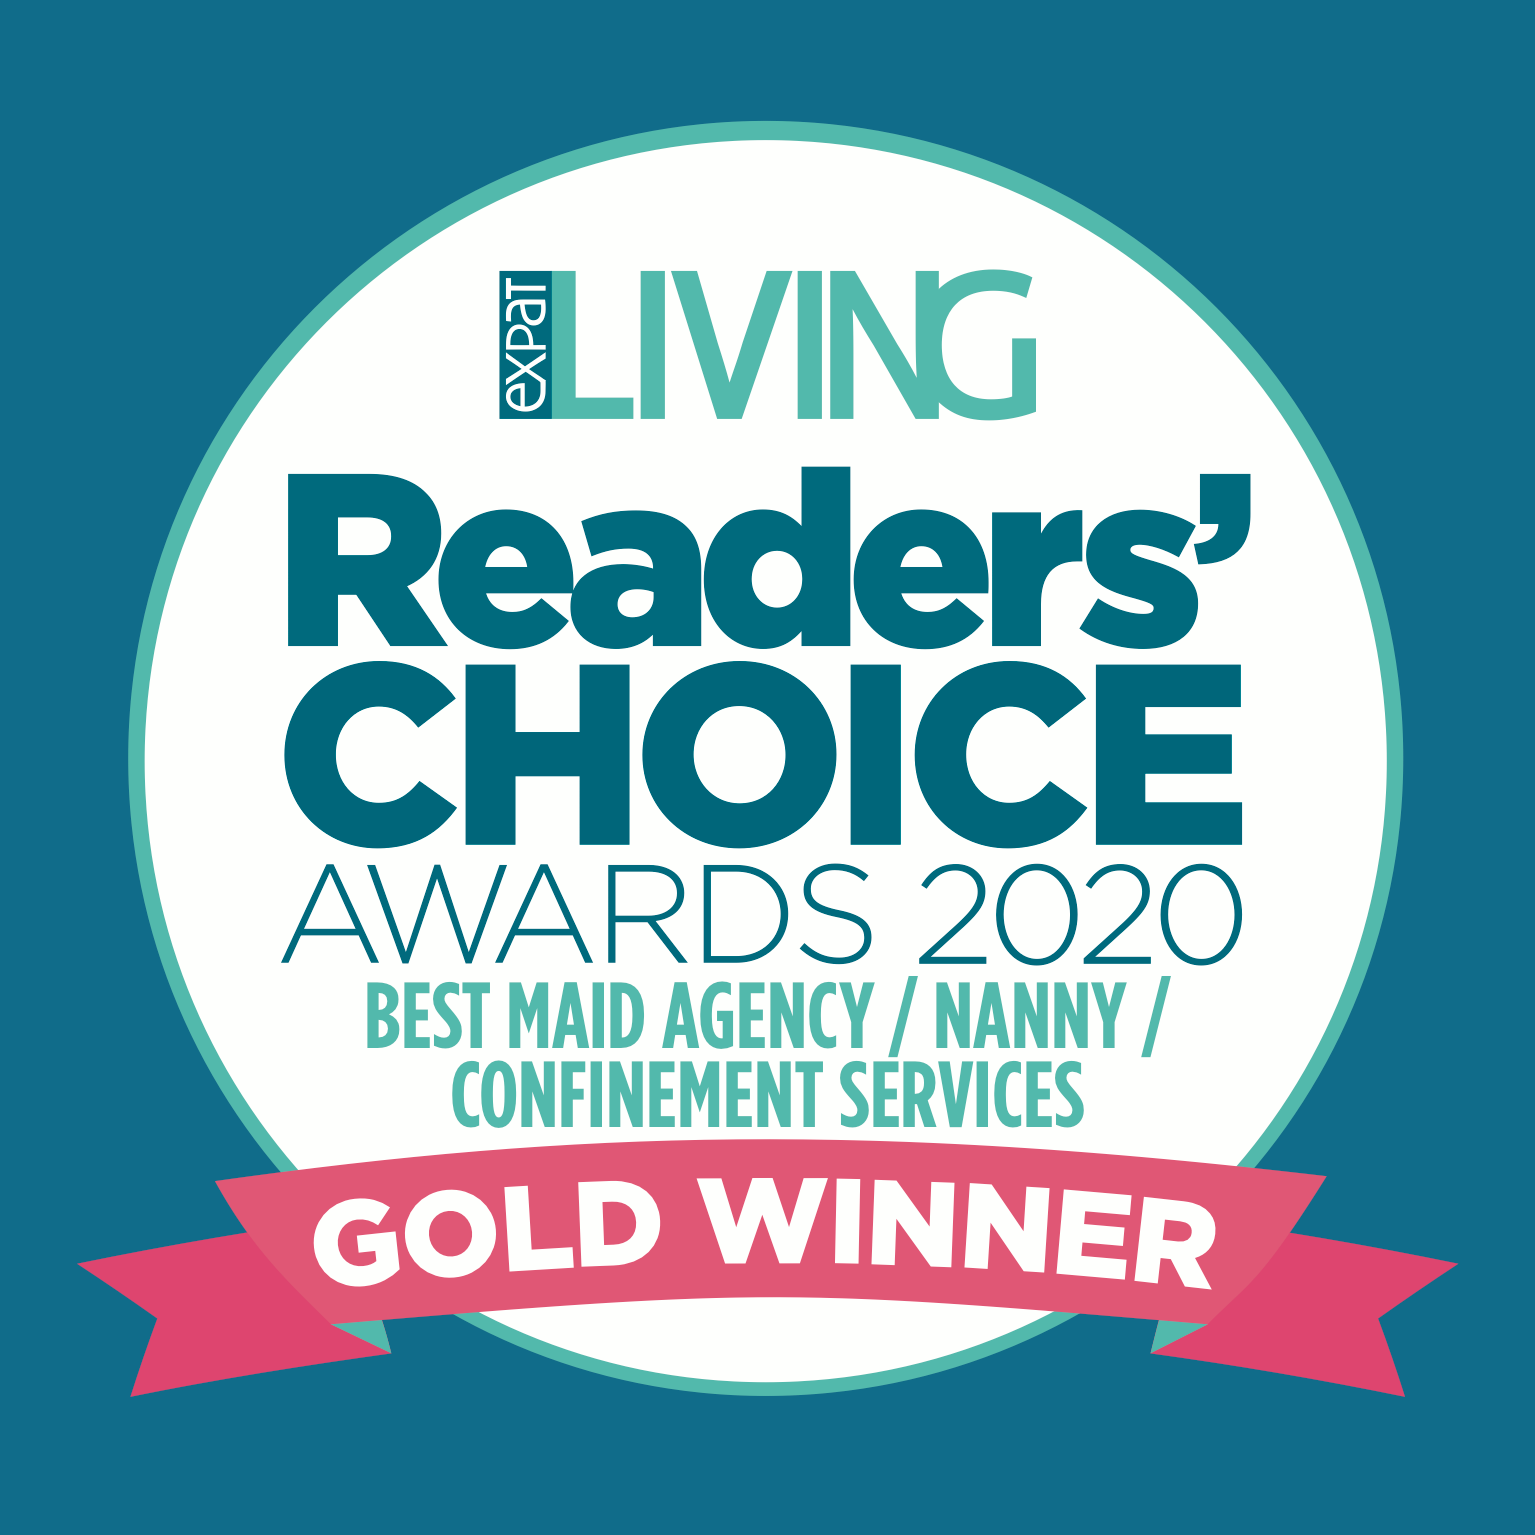 Gold winner of the Reader's Choice Awards 2020 for Employment Agency